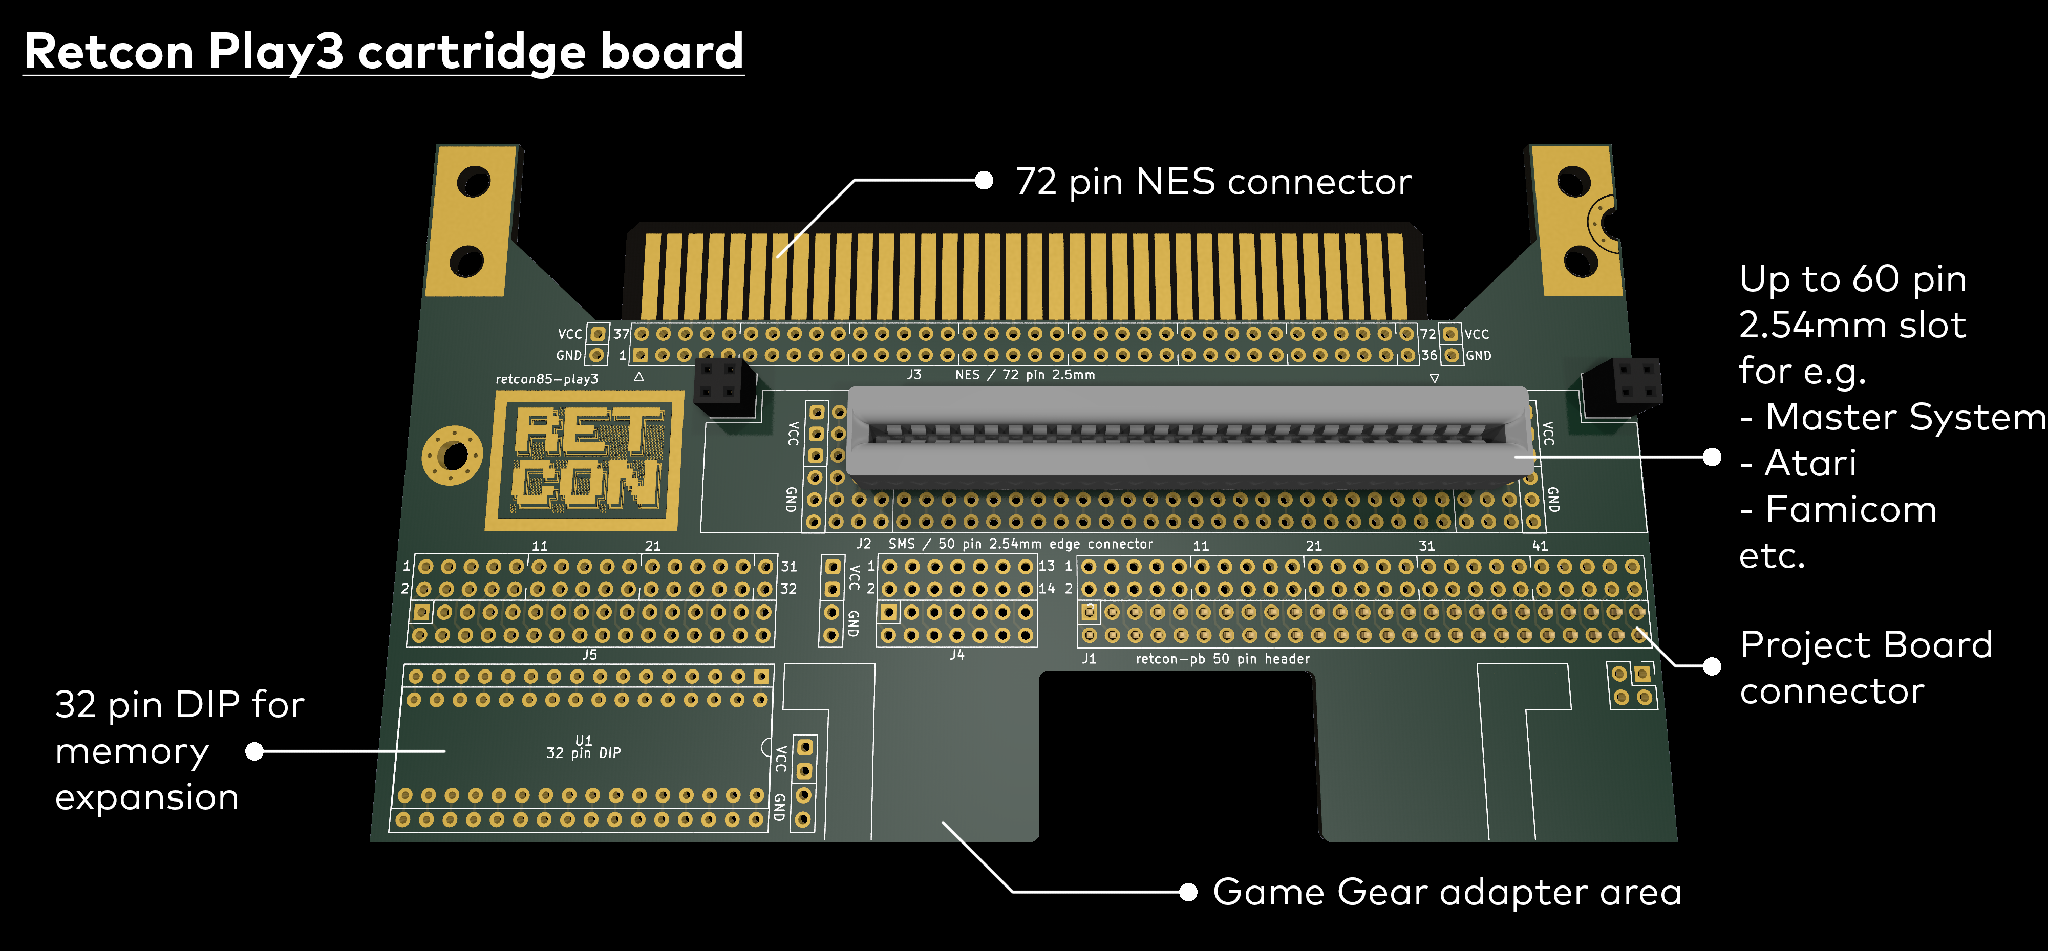 The Retcon Play3 cartridge board with annotations